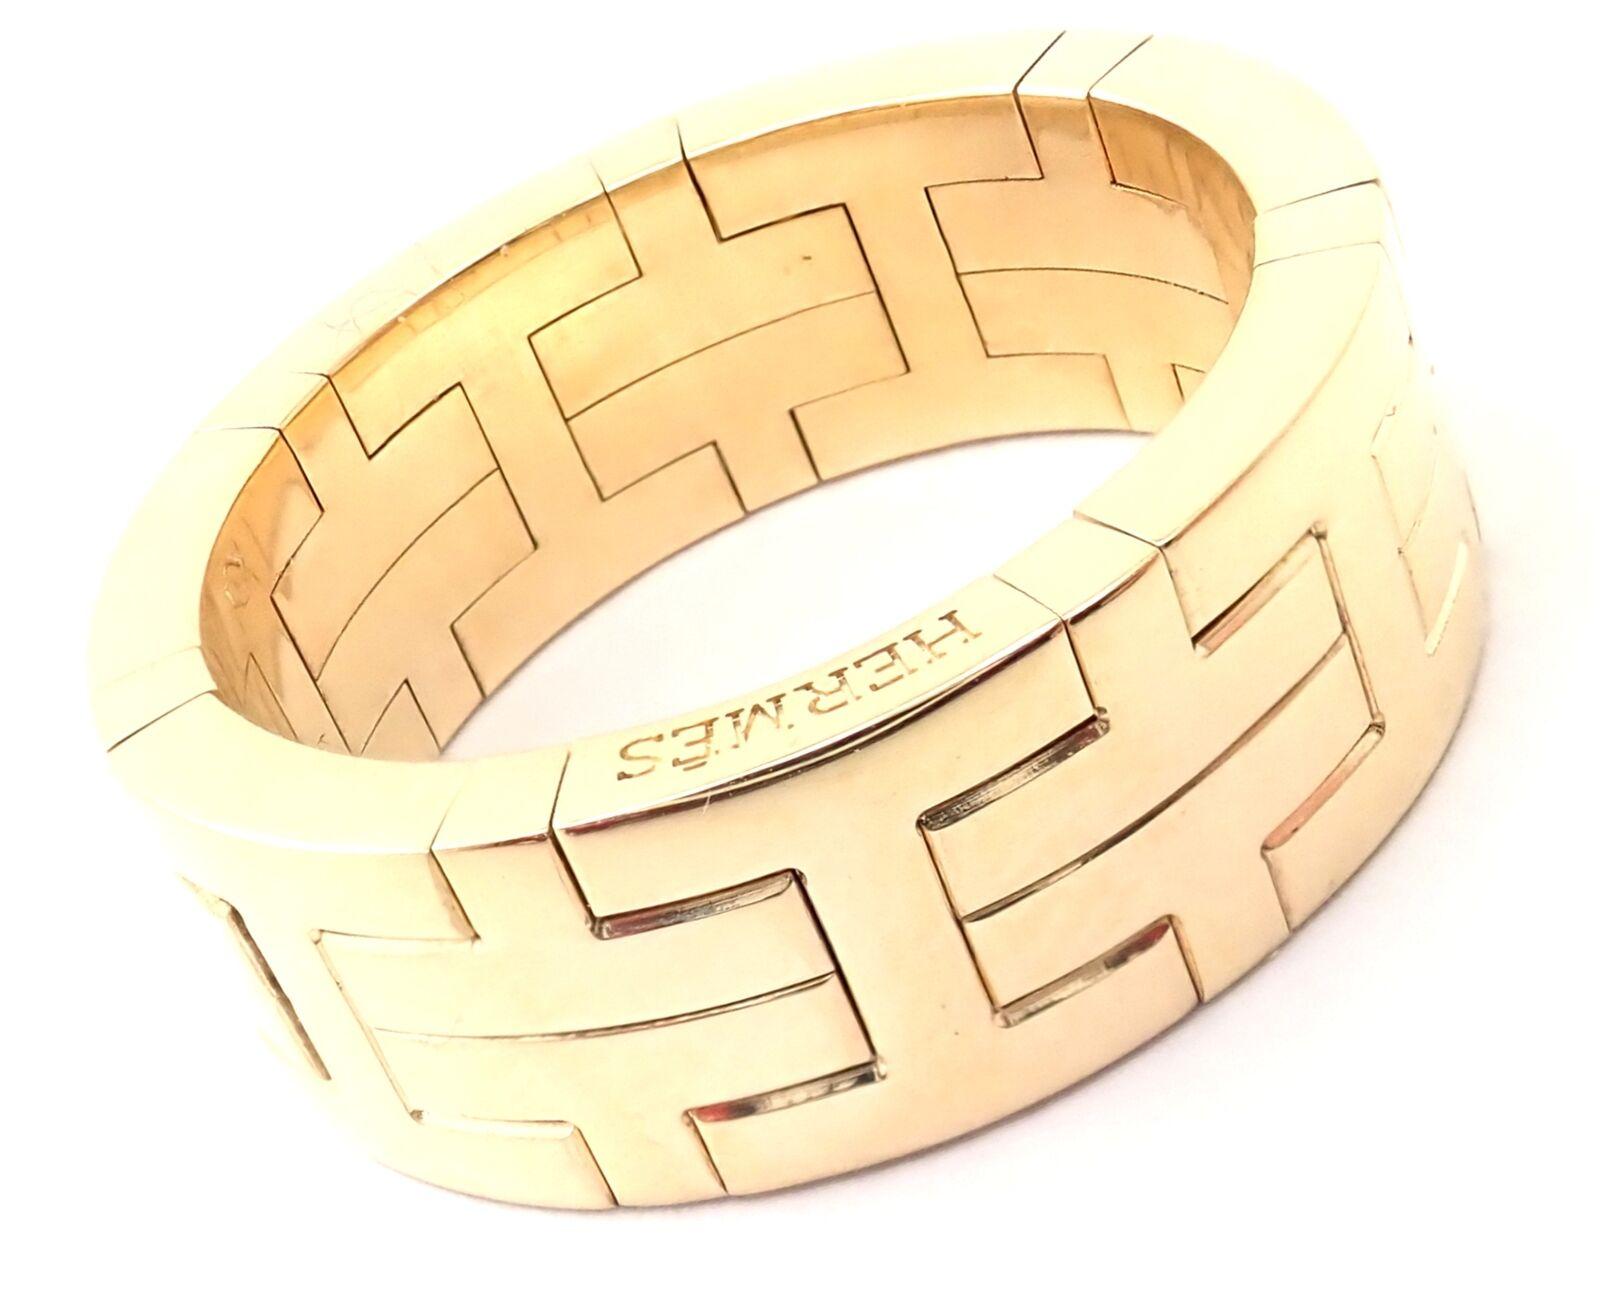 18k Yellow Gold H Motif Wide Band Ring by Hermes. 
Details: 
Ring Size: European 54, US 6 3/4
Weight: 10.6 grams
Band Width: 8mm
Stamped Hallmarks: Hermes 750 54 -04 037XX(serial number omitted)
*Free Shipping within the United States*
YOUR PRICE: